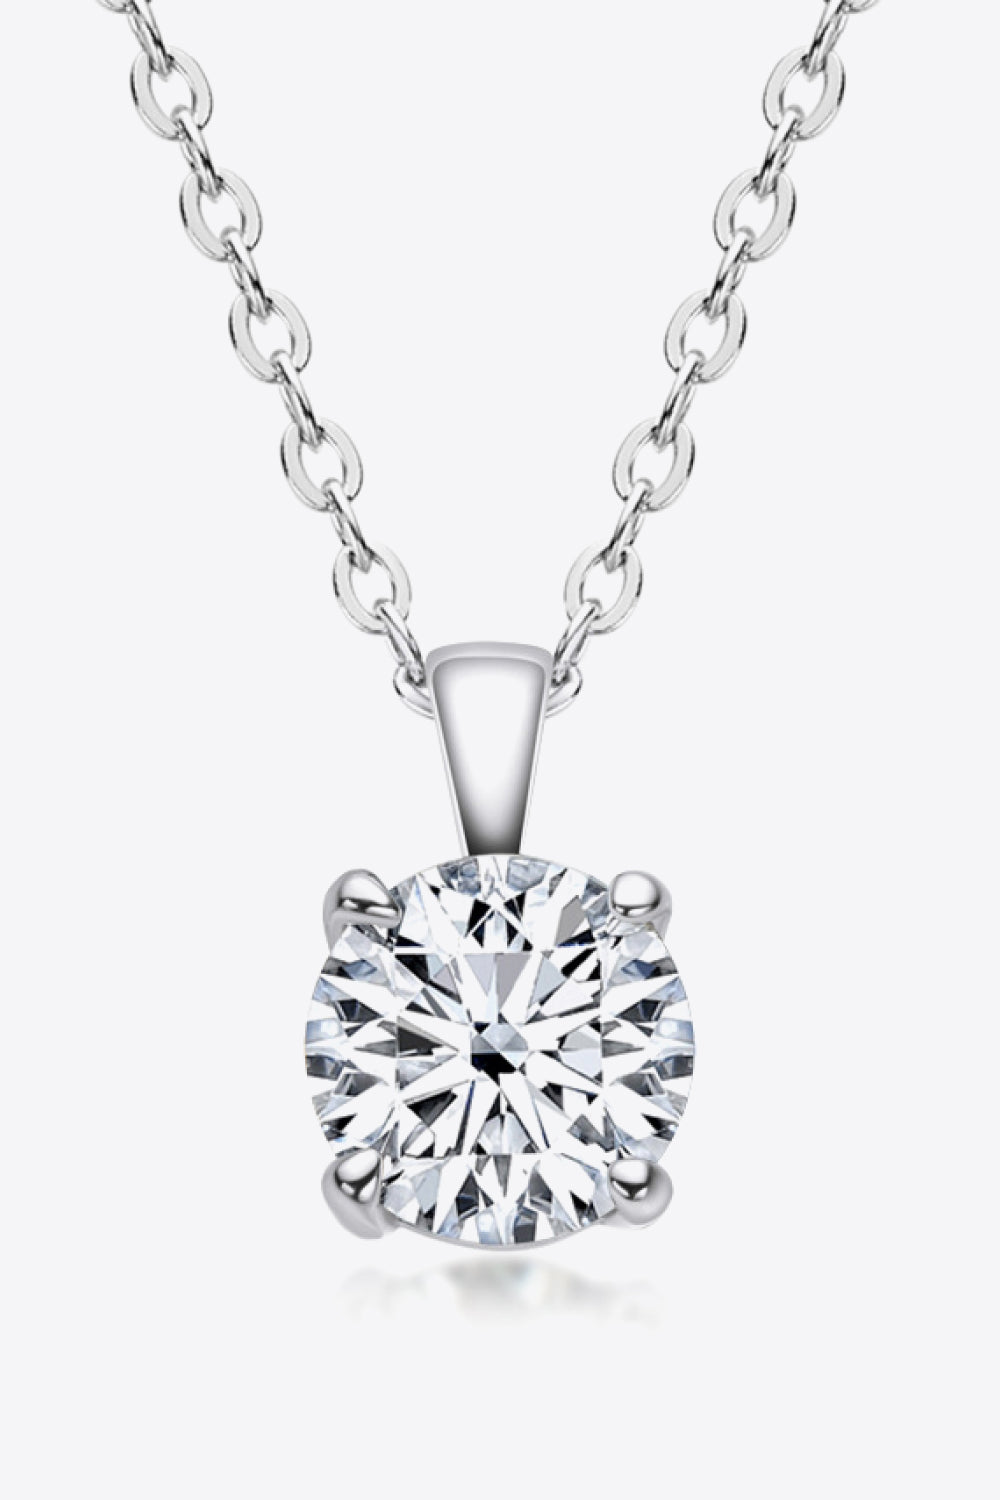 Moissanite Chain-Link Necklace Image3